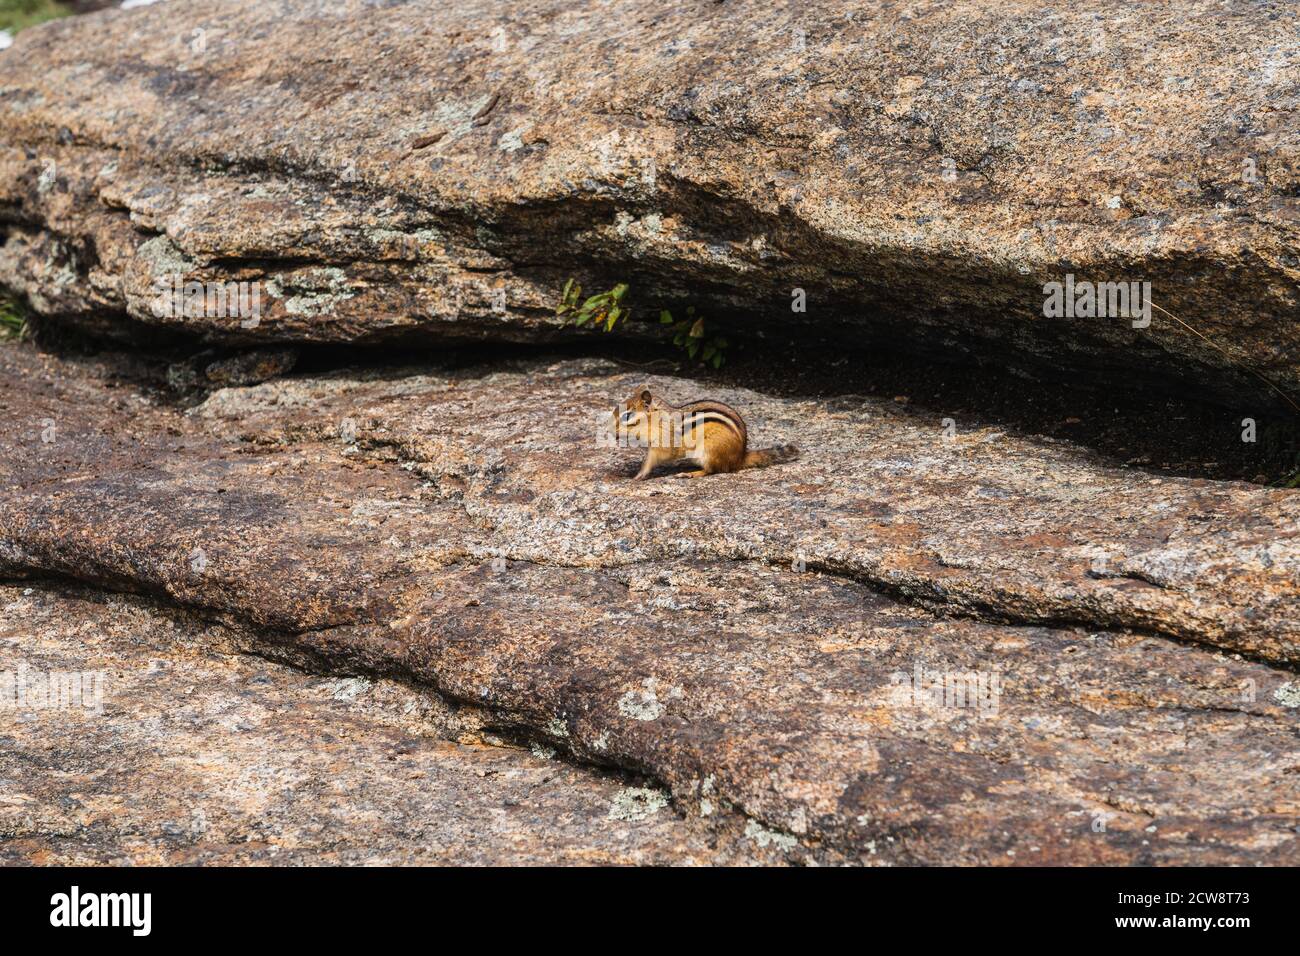 A small chipmunk on a hiking trail in the Adirondacks Stock Photo